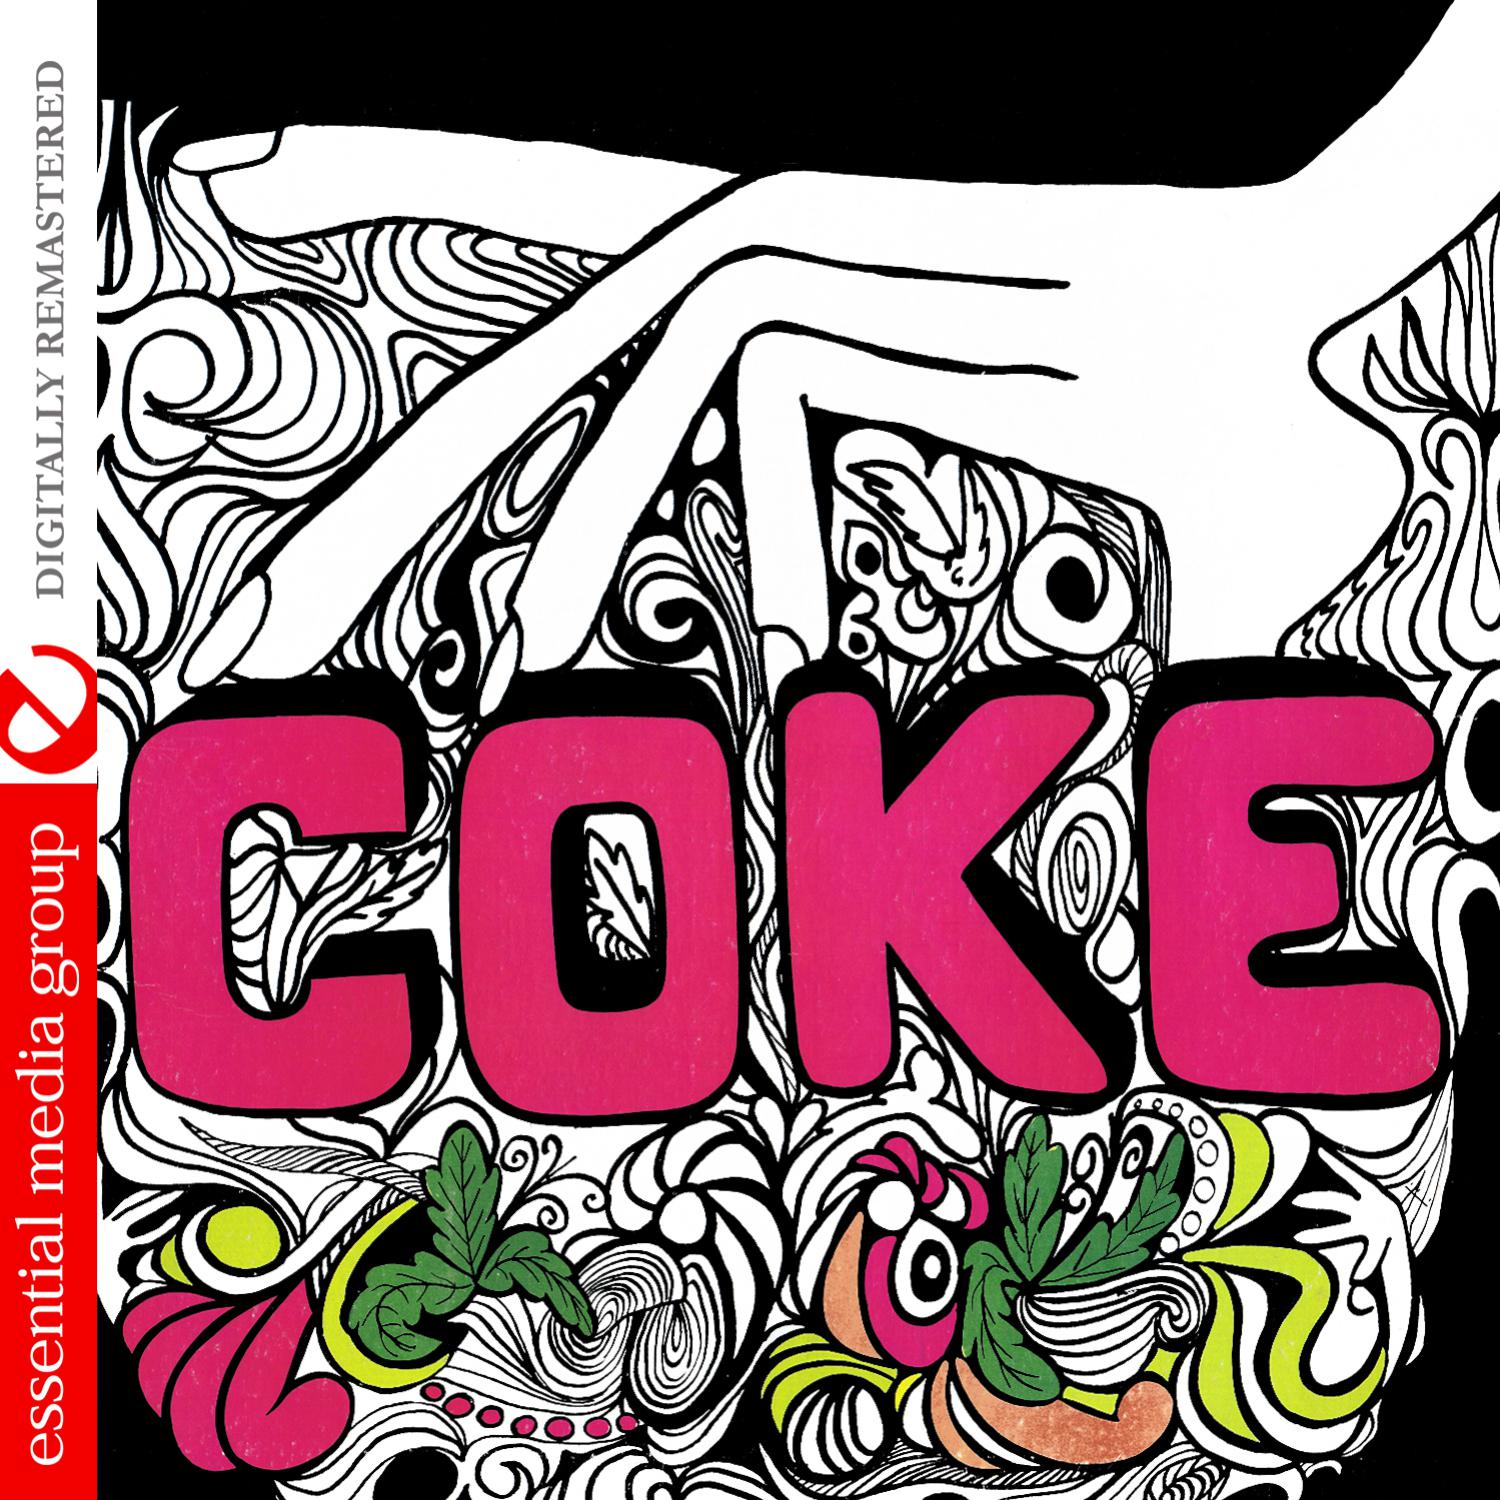 Coke - Got To Touch Your Face